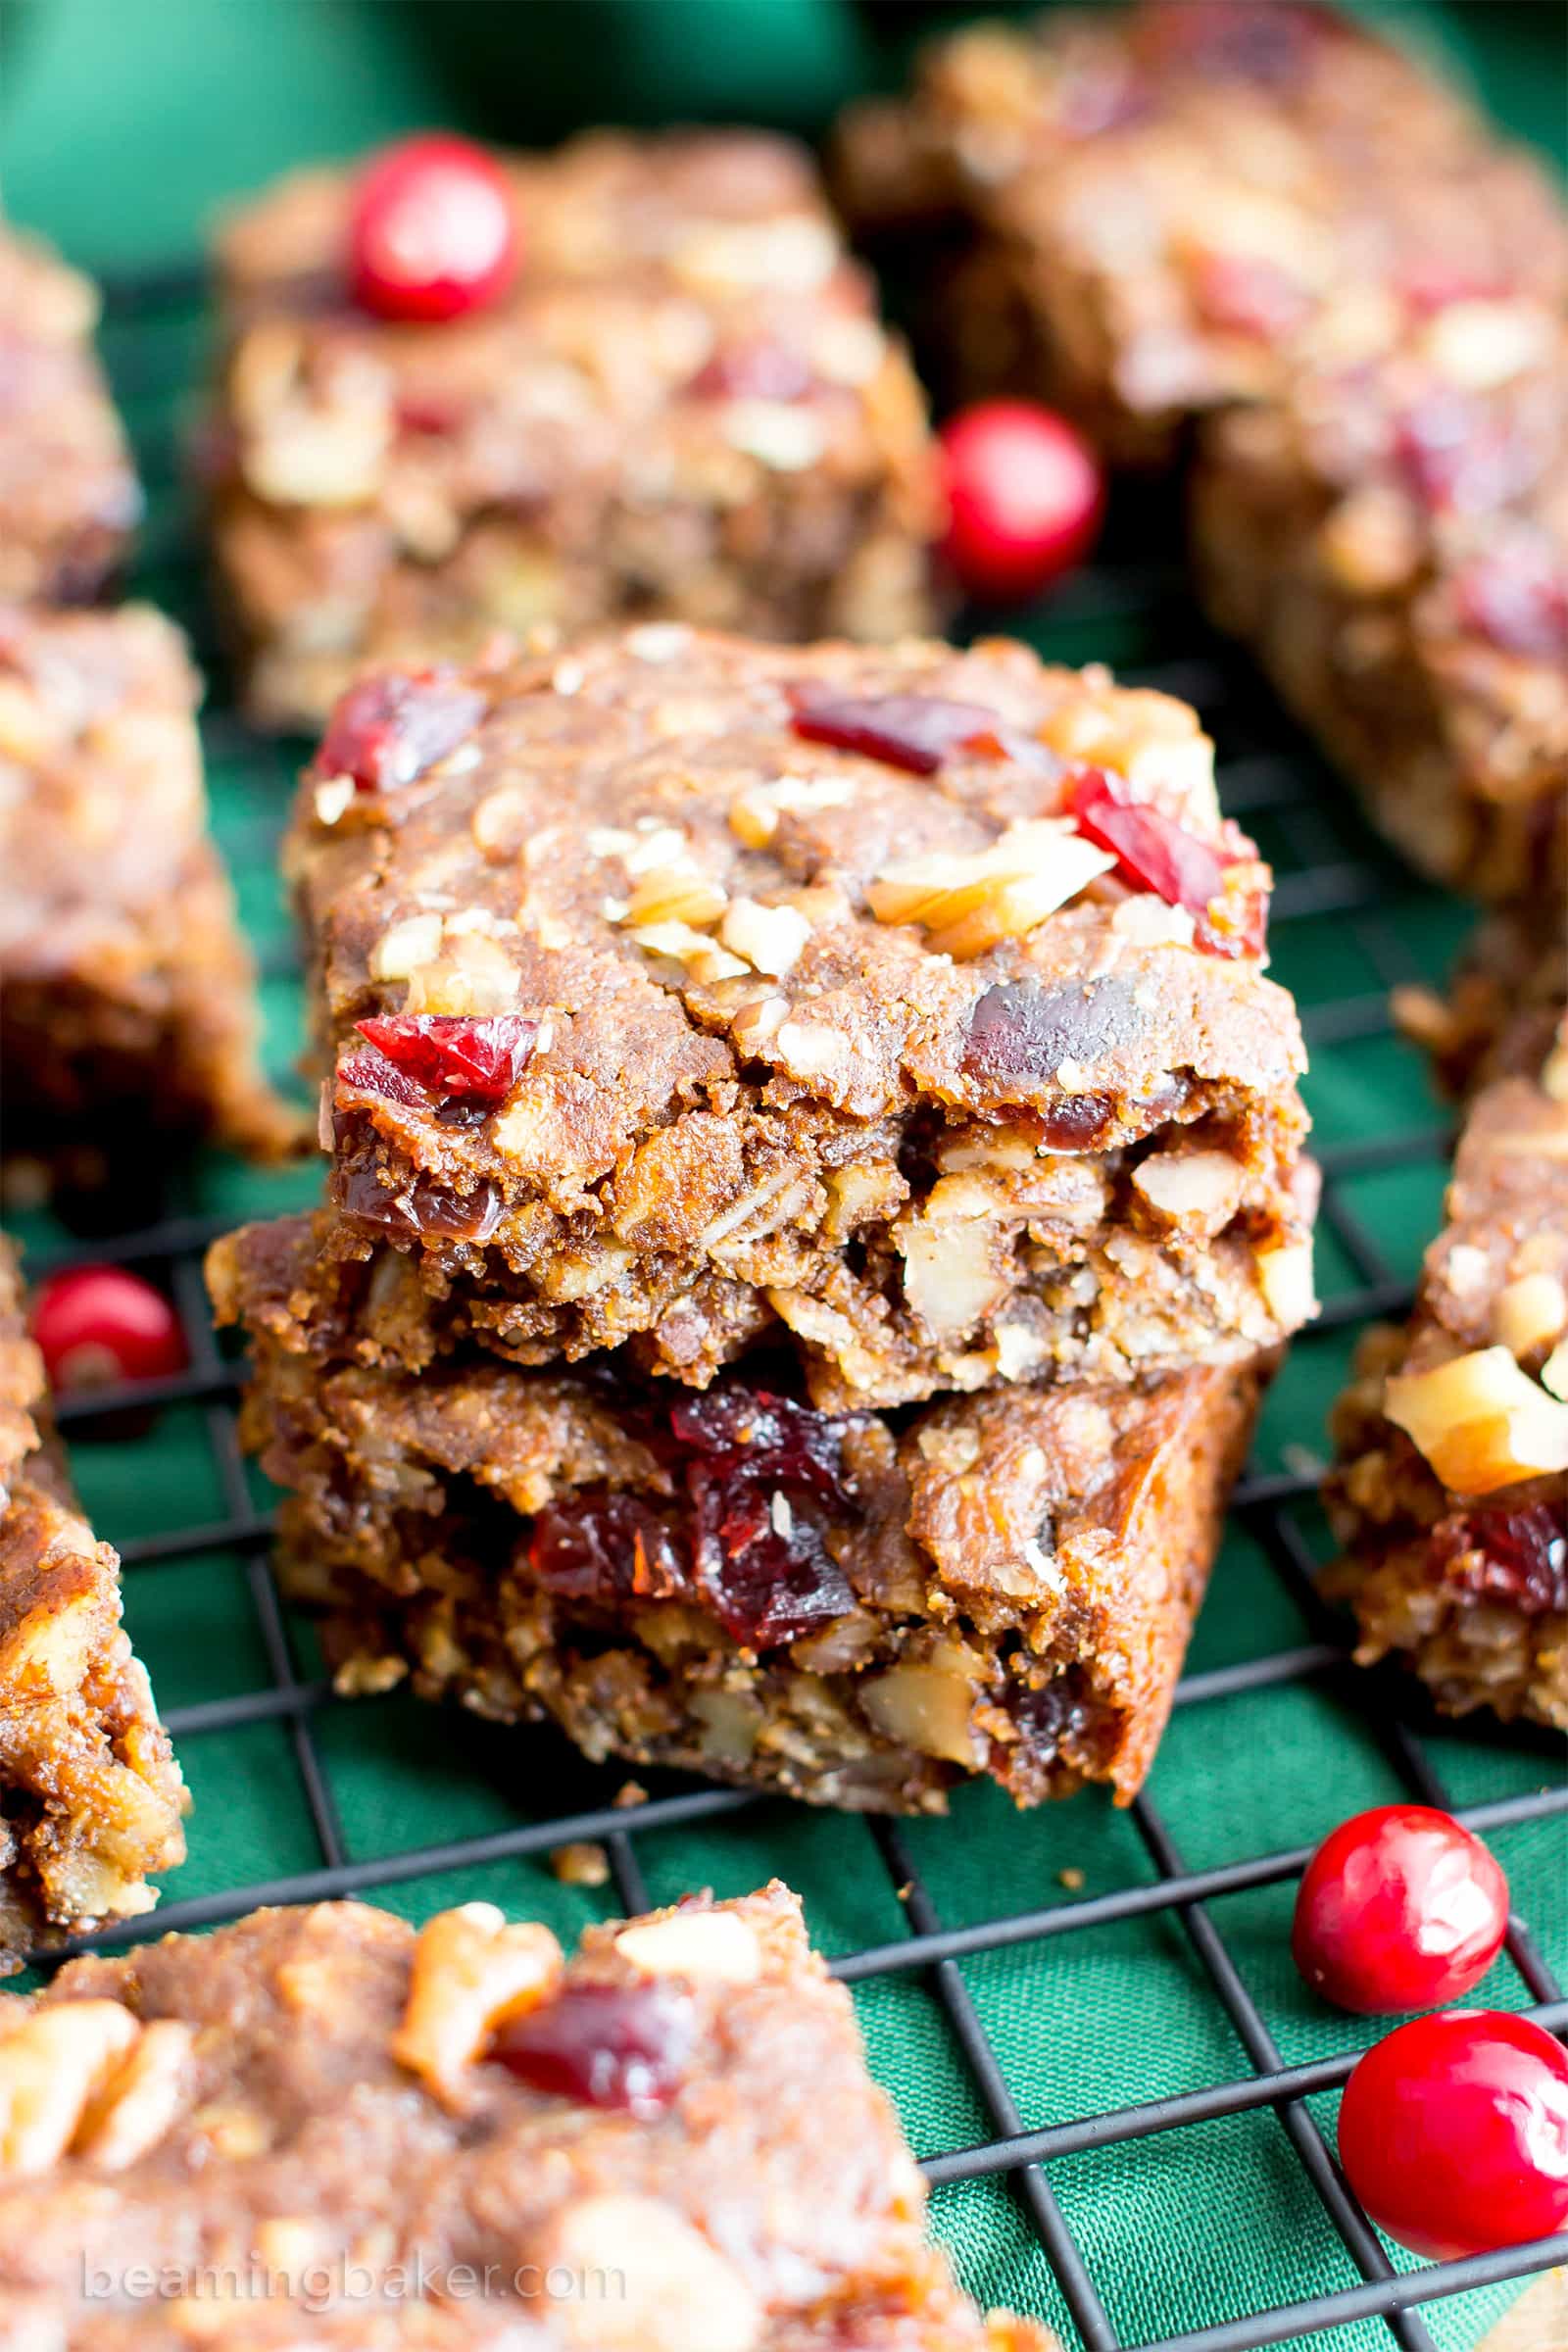 Gingerbread Oatmeal Homemade Breakfast Bars (V, GF): an easy recipe for deliciously soft homemade breakfast bars filled with your favorite holiday flavors. #Vegan #GlutenFree #DairyFree #Breakfast #Oatmeal | Recipe on BeamingBaker.com